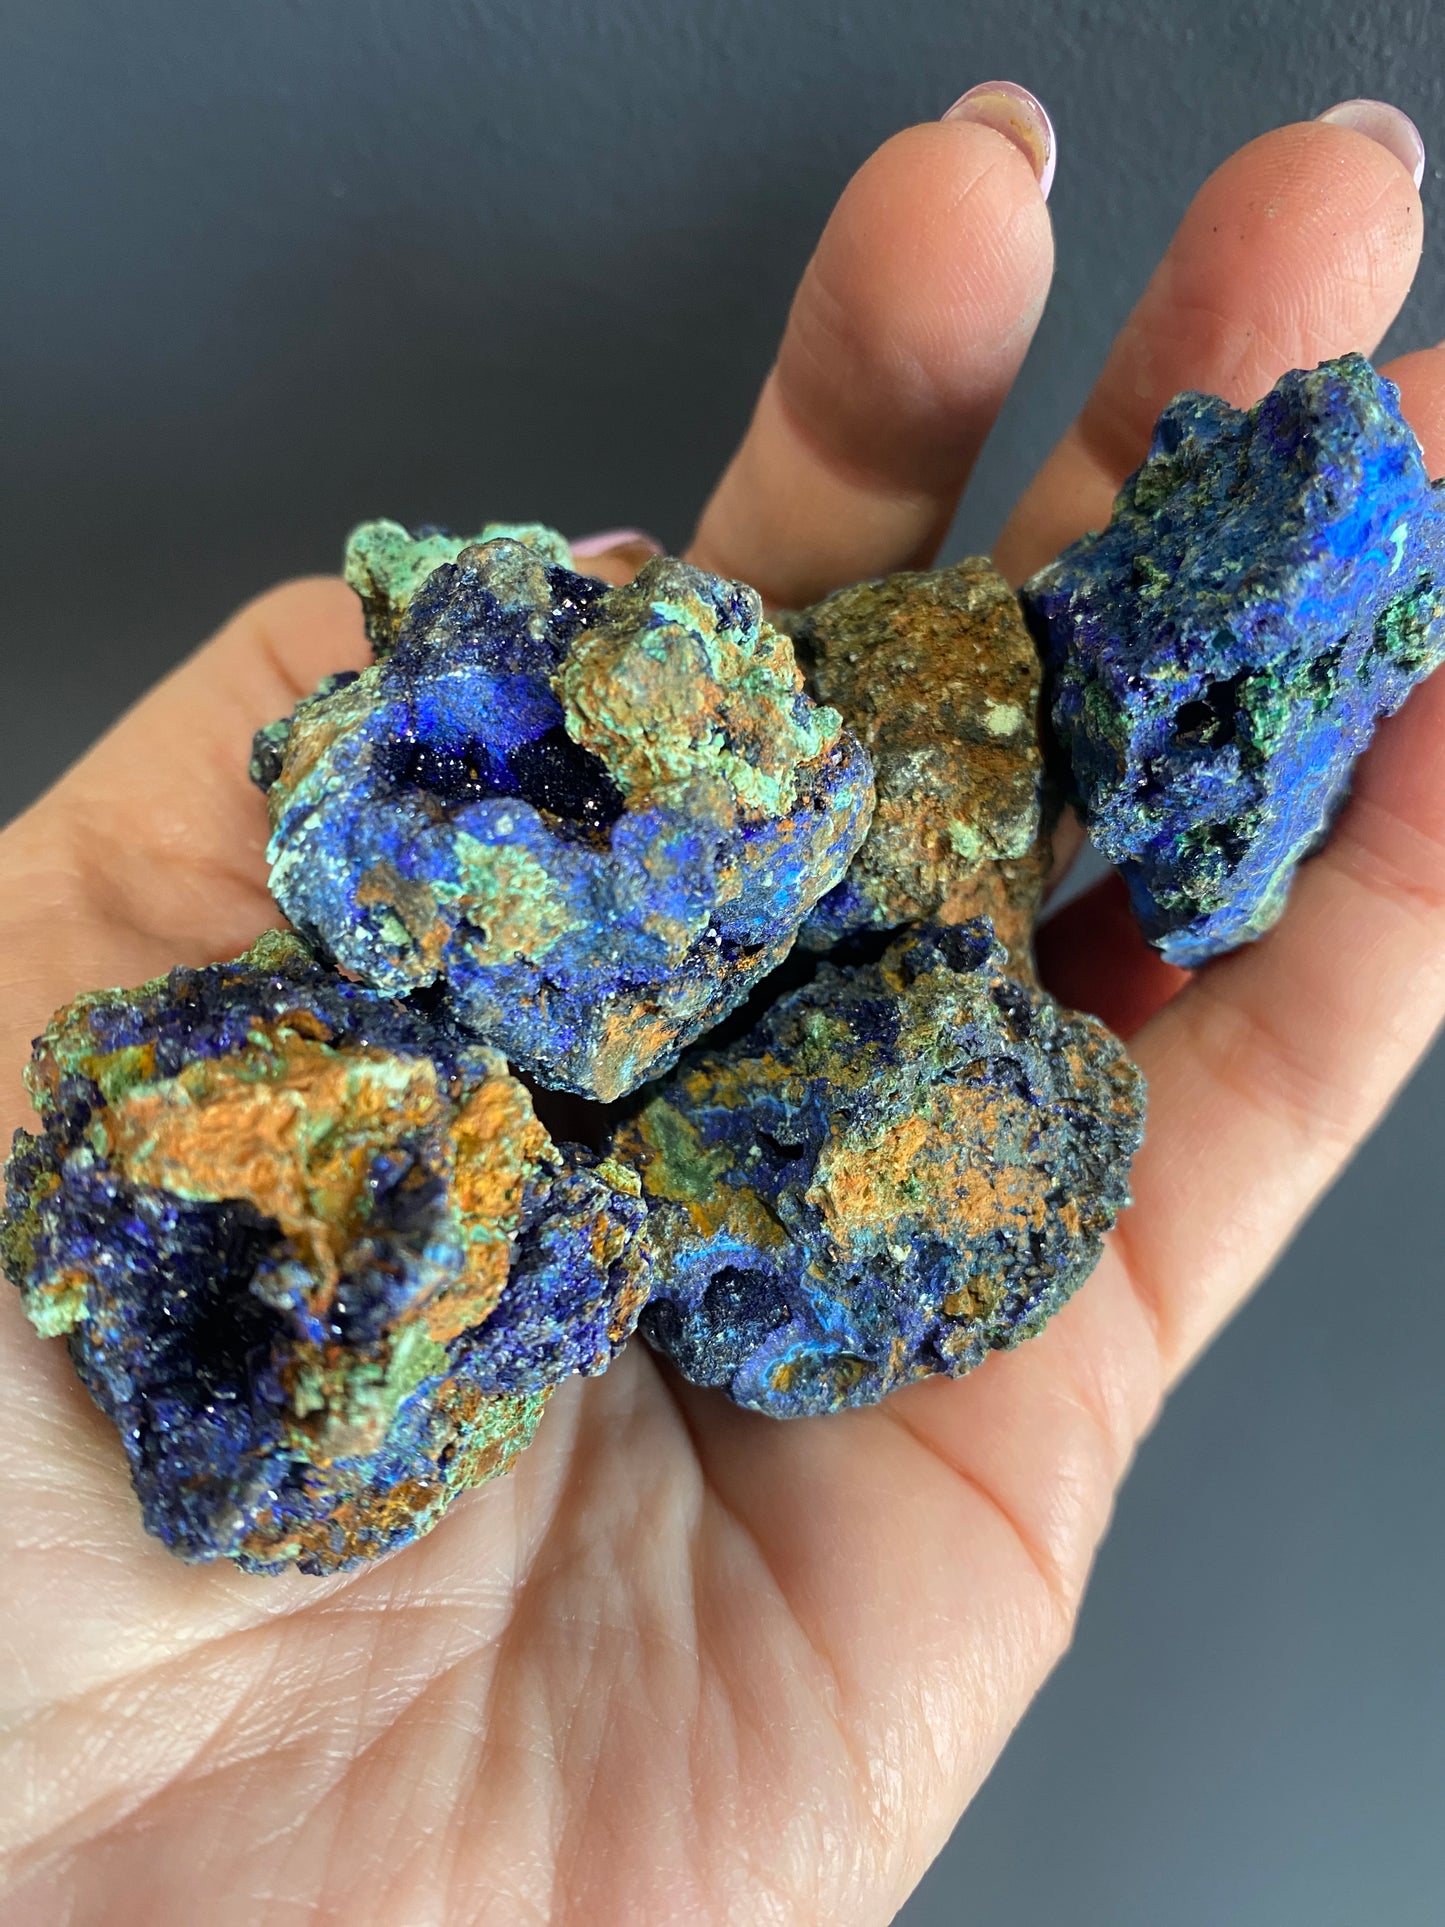 Azurite Rough Natural Specimen Raw Azurite and Malachite / Natural Azurite Specimen / Gemmy Azurite from Fujian, Guangdong Province